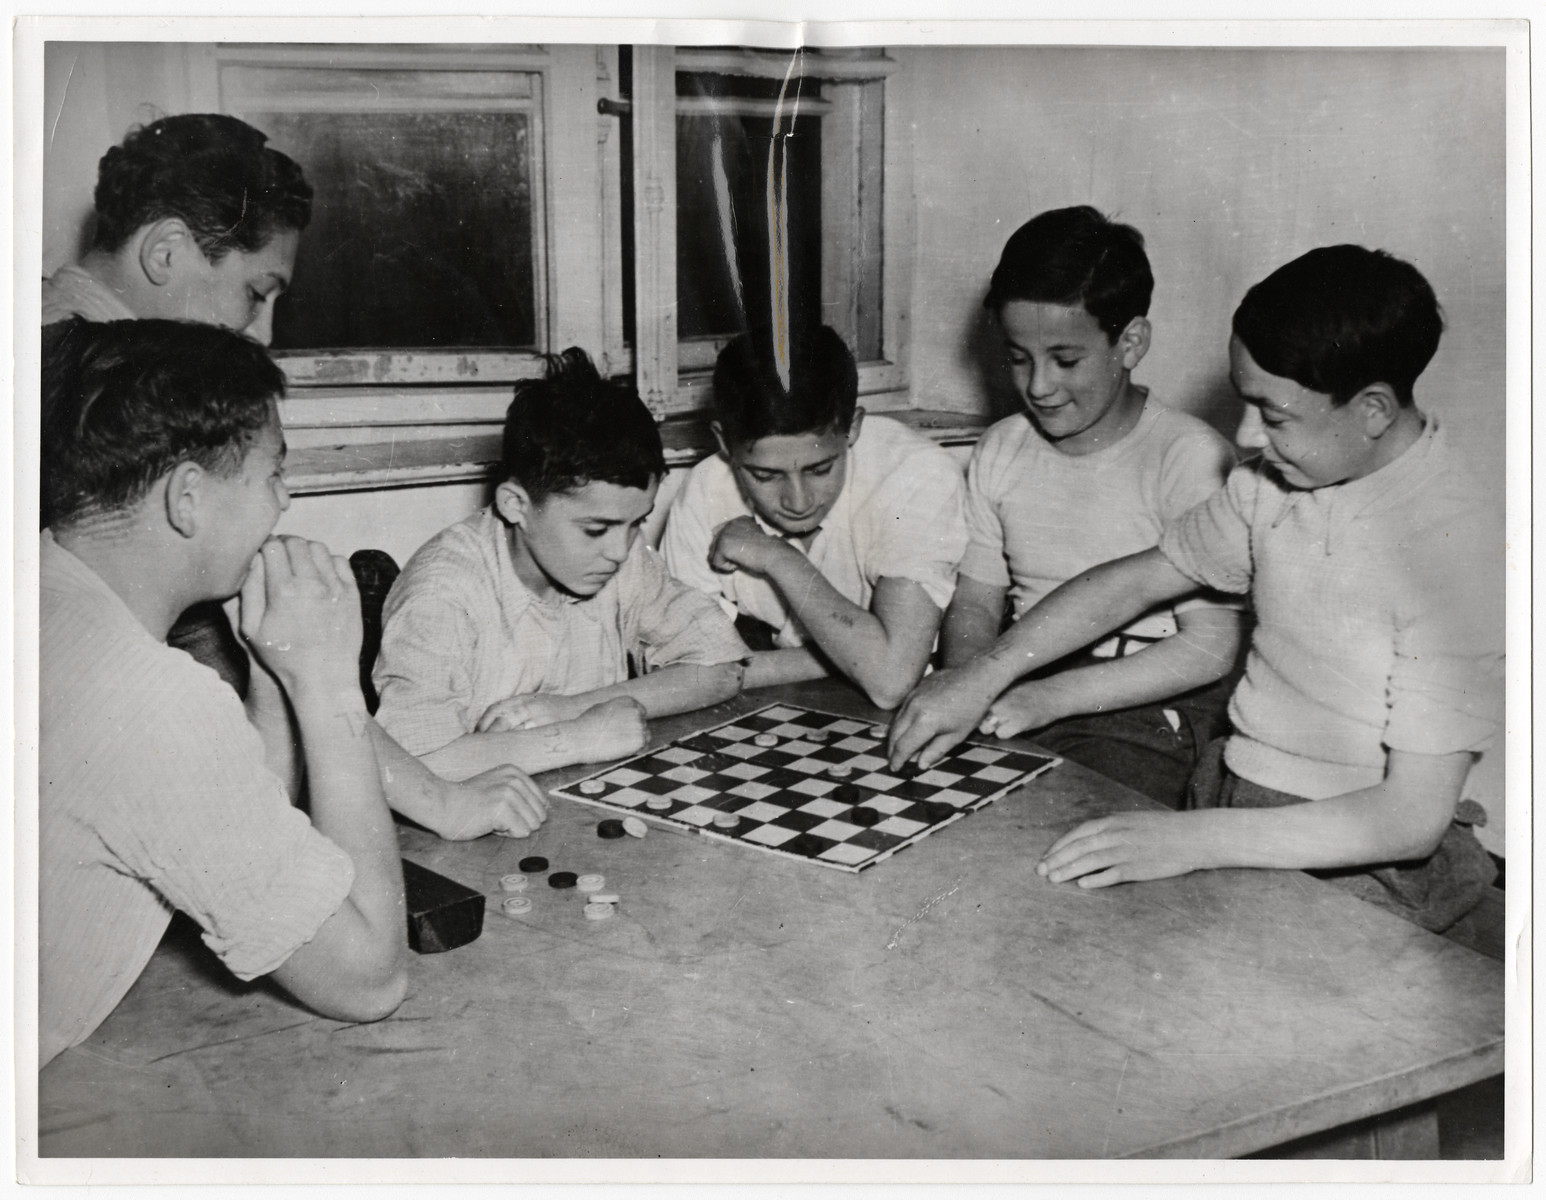 Young boys play checkers in Kloster Indersdorf children's home. Many have the initials KL tattooed on their arms.

Pictured on the left center is Sacher (later Steve) Israeler.

Original Caption: "Orphans of 12 nations have found a new home in a former nunnery at Indersdorf, Bavaria, where UNRRA (United Nations Relief  and Rehibilitation Administration) recently opened an international refuge for children whose parents were killed or lost during the war were sent from Nazi foreign labor and concentration camps to this institution. Two-thirds of the group are Polish and Jewish. Some are too young to remember their parents and some do not know their own names. Most of them from concentration camps have no other identification than a number and the letters 'KL' (Konzentrations Lager) marked on their skins. When children arrive at the institution, they are deloused, bathed and given clean clothes. Medical attendants then innoculate them against typhoid fever, diptheria and smallpox. The infants are cared for by nurses while older children begin elementary education in their own language under teachers of the Allied nations."